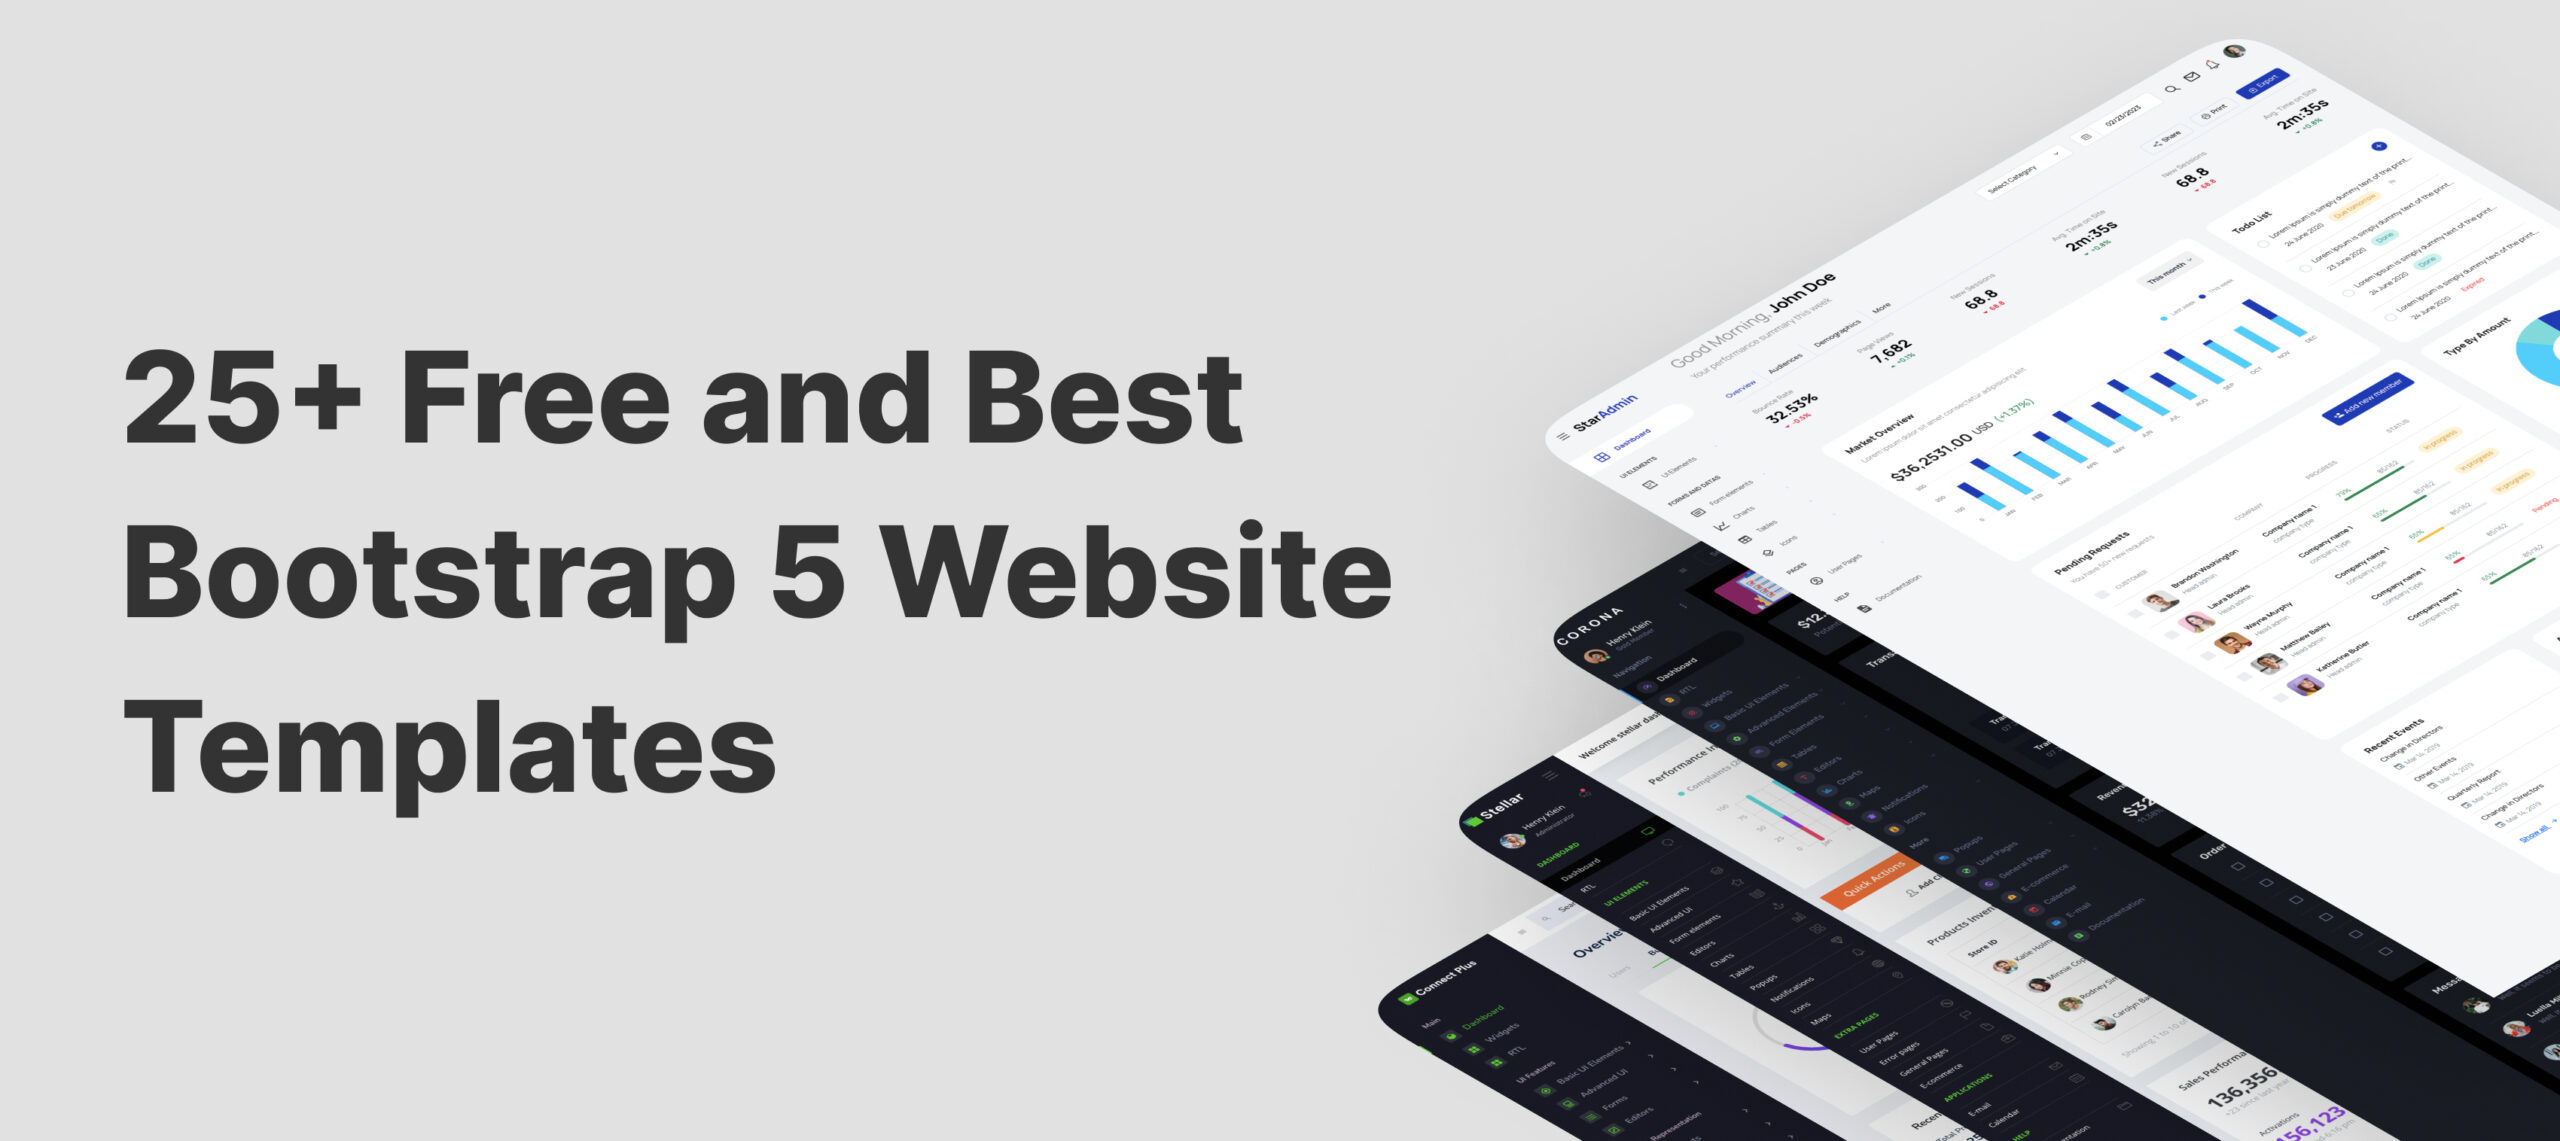  25+ Free and Best Bootstrap 5 Website Templates